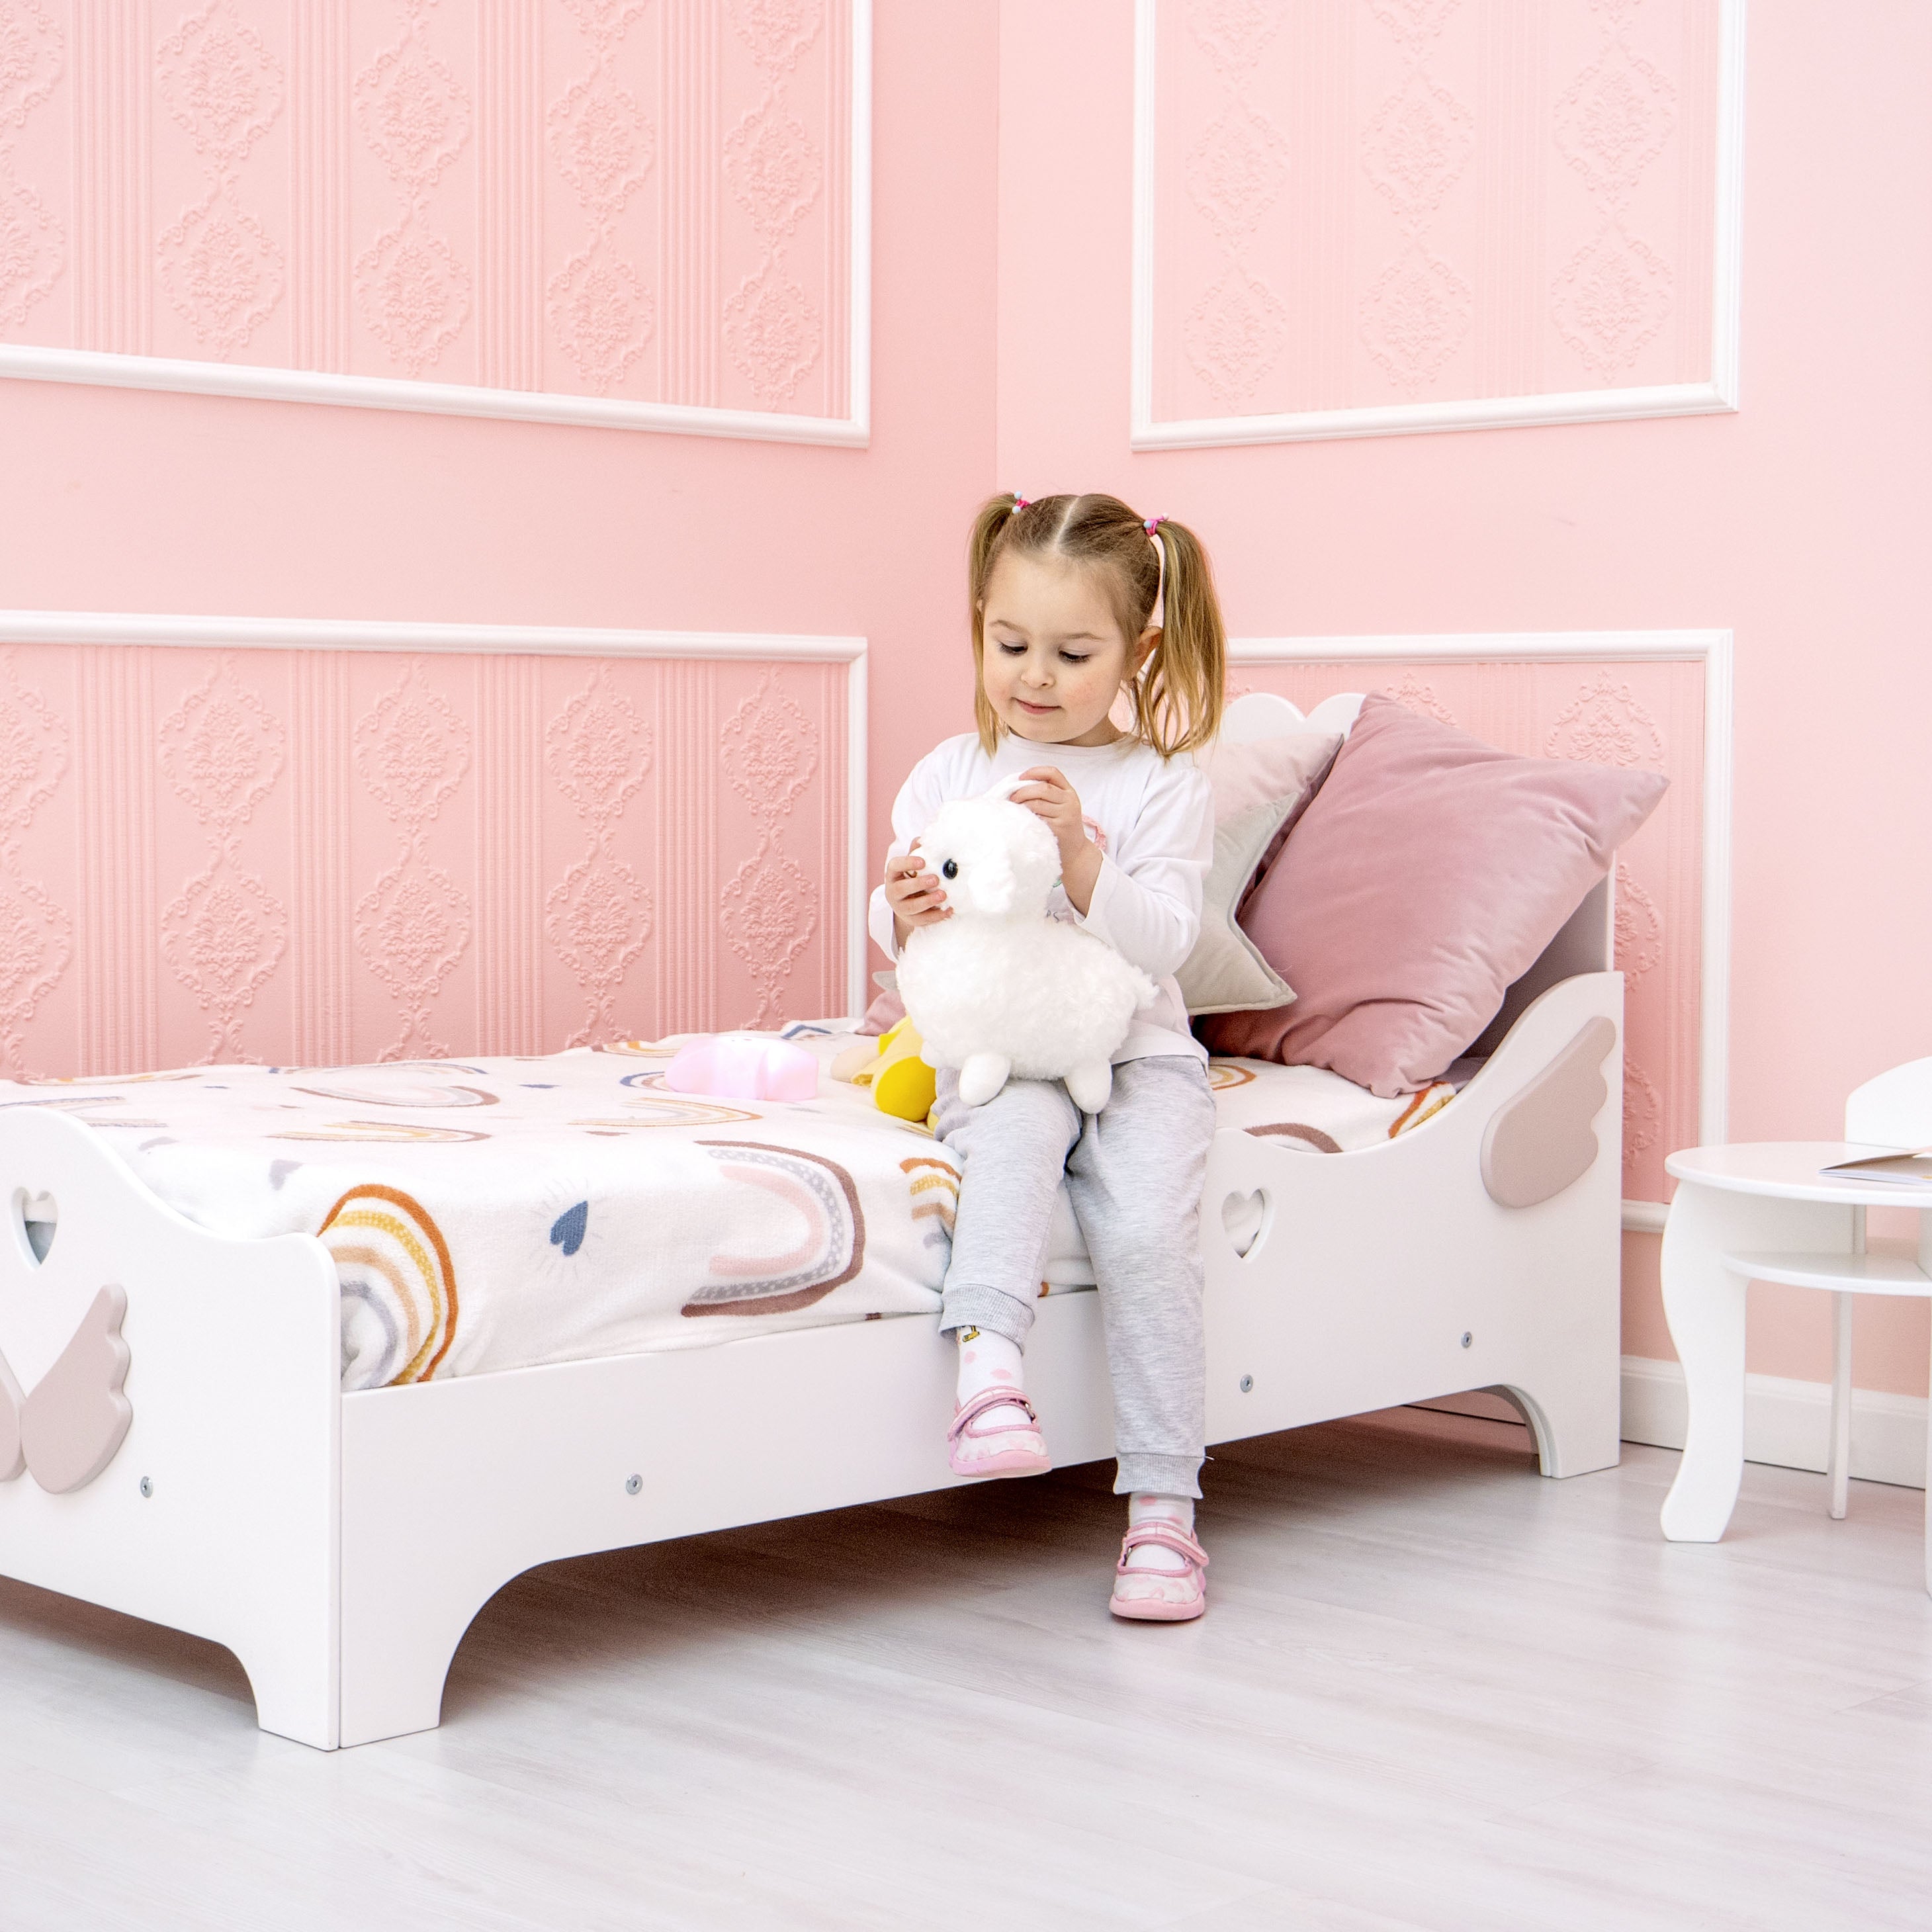 Toddler House Bed on Legs Children Bed With Rails, Toddler Bed for